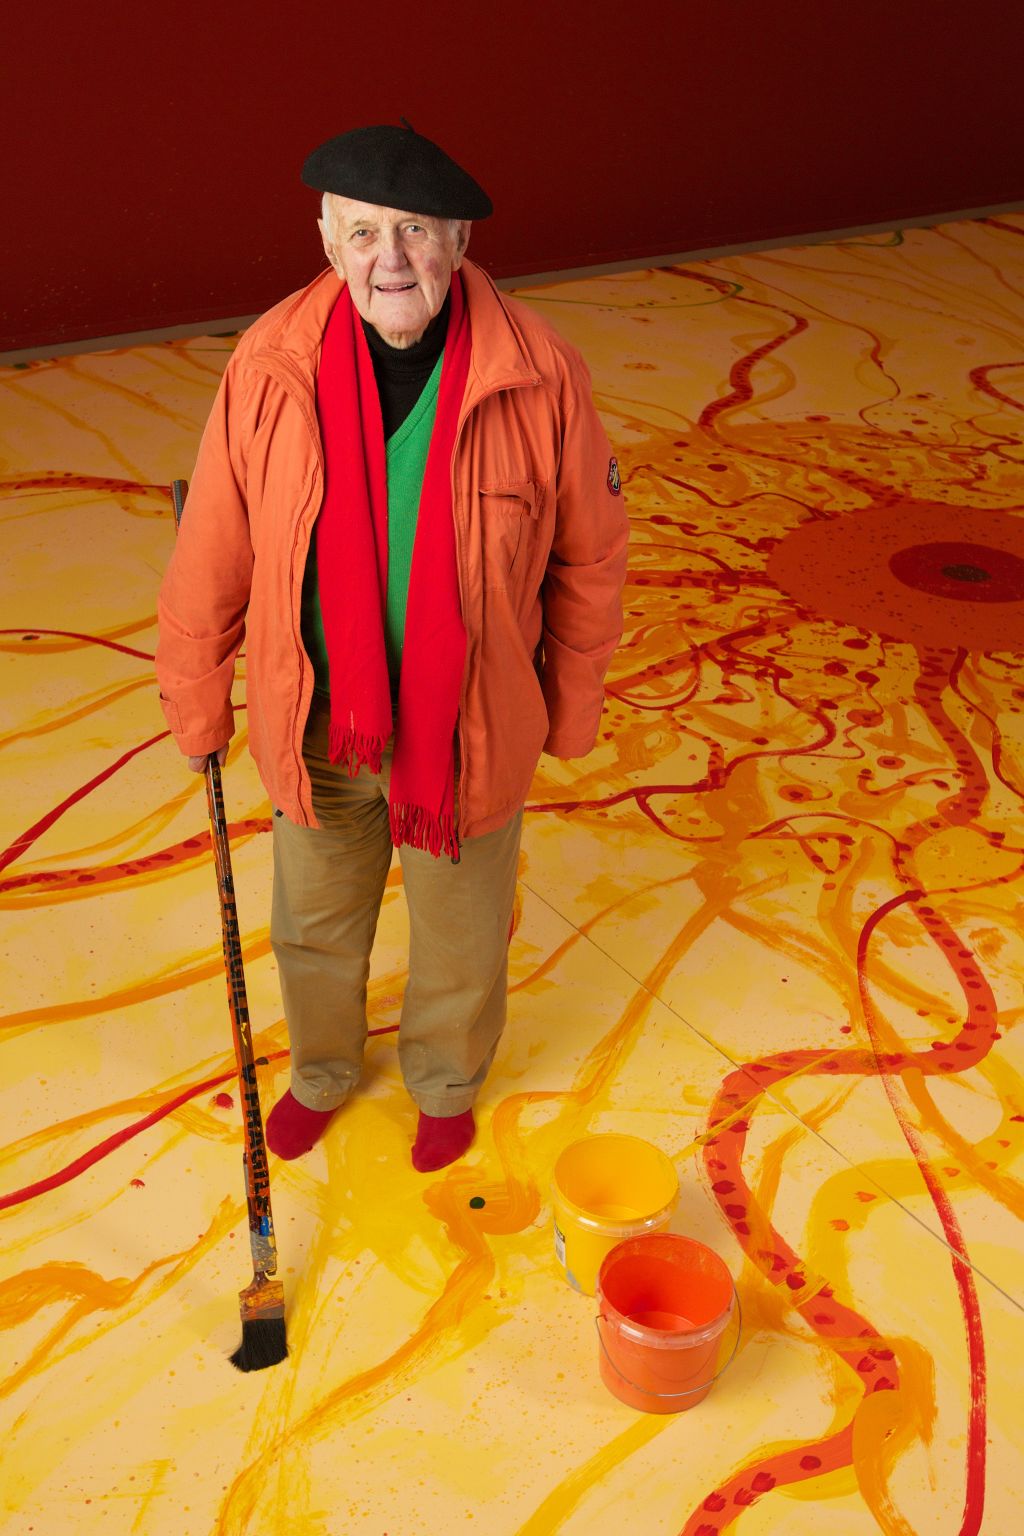 Artist John Olsen stands with his artwork The King Sun at the Robertson studio.  Photo: Wolter Peeters